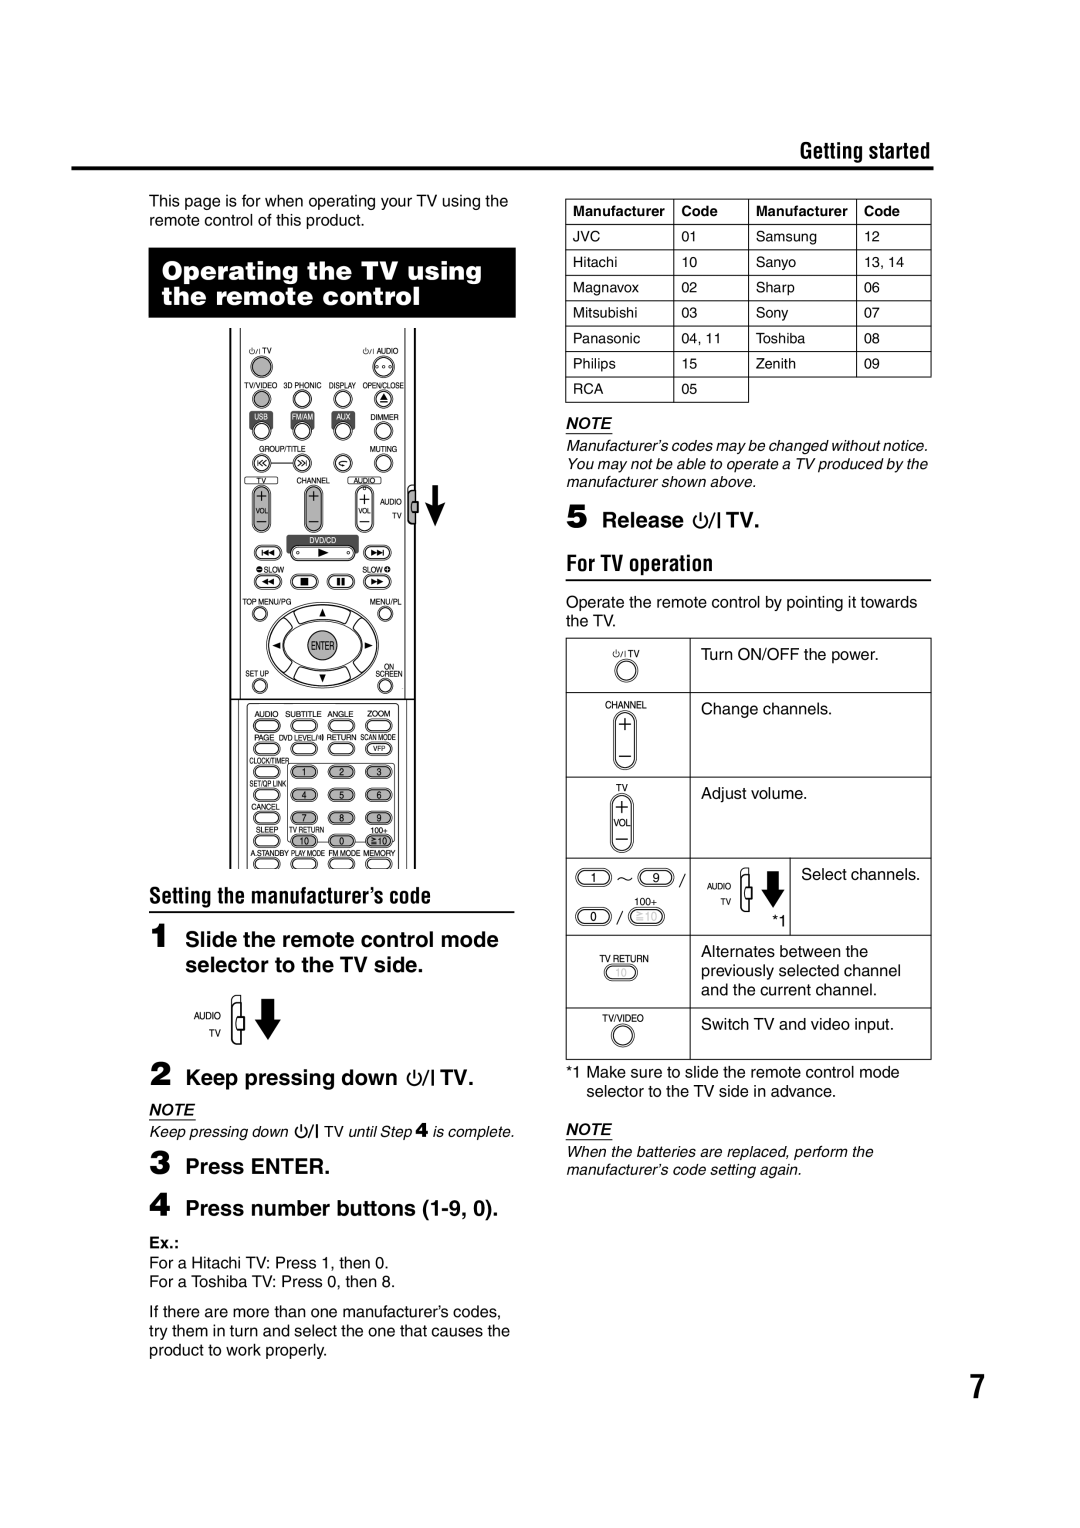 JVC GNT0066-001A manual Operating the TV using the remote control, Getting started, Setting the manufacturer’s code 